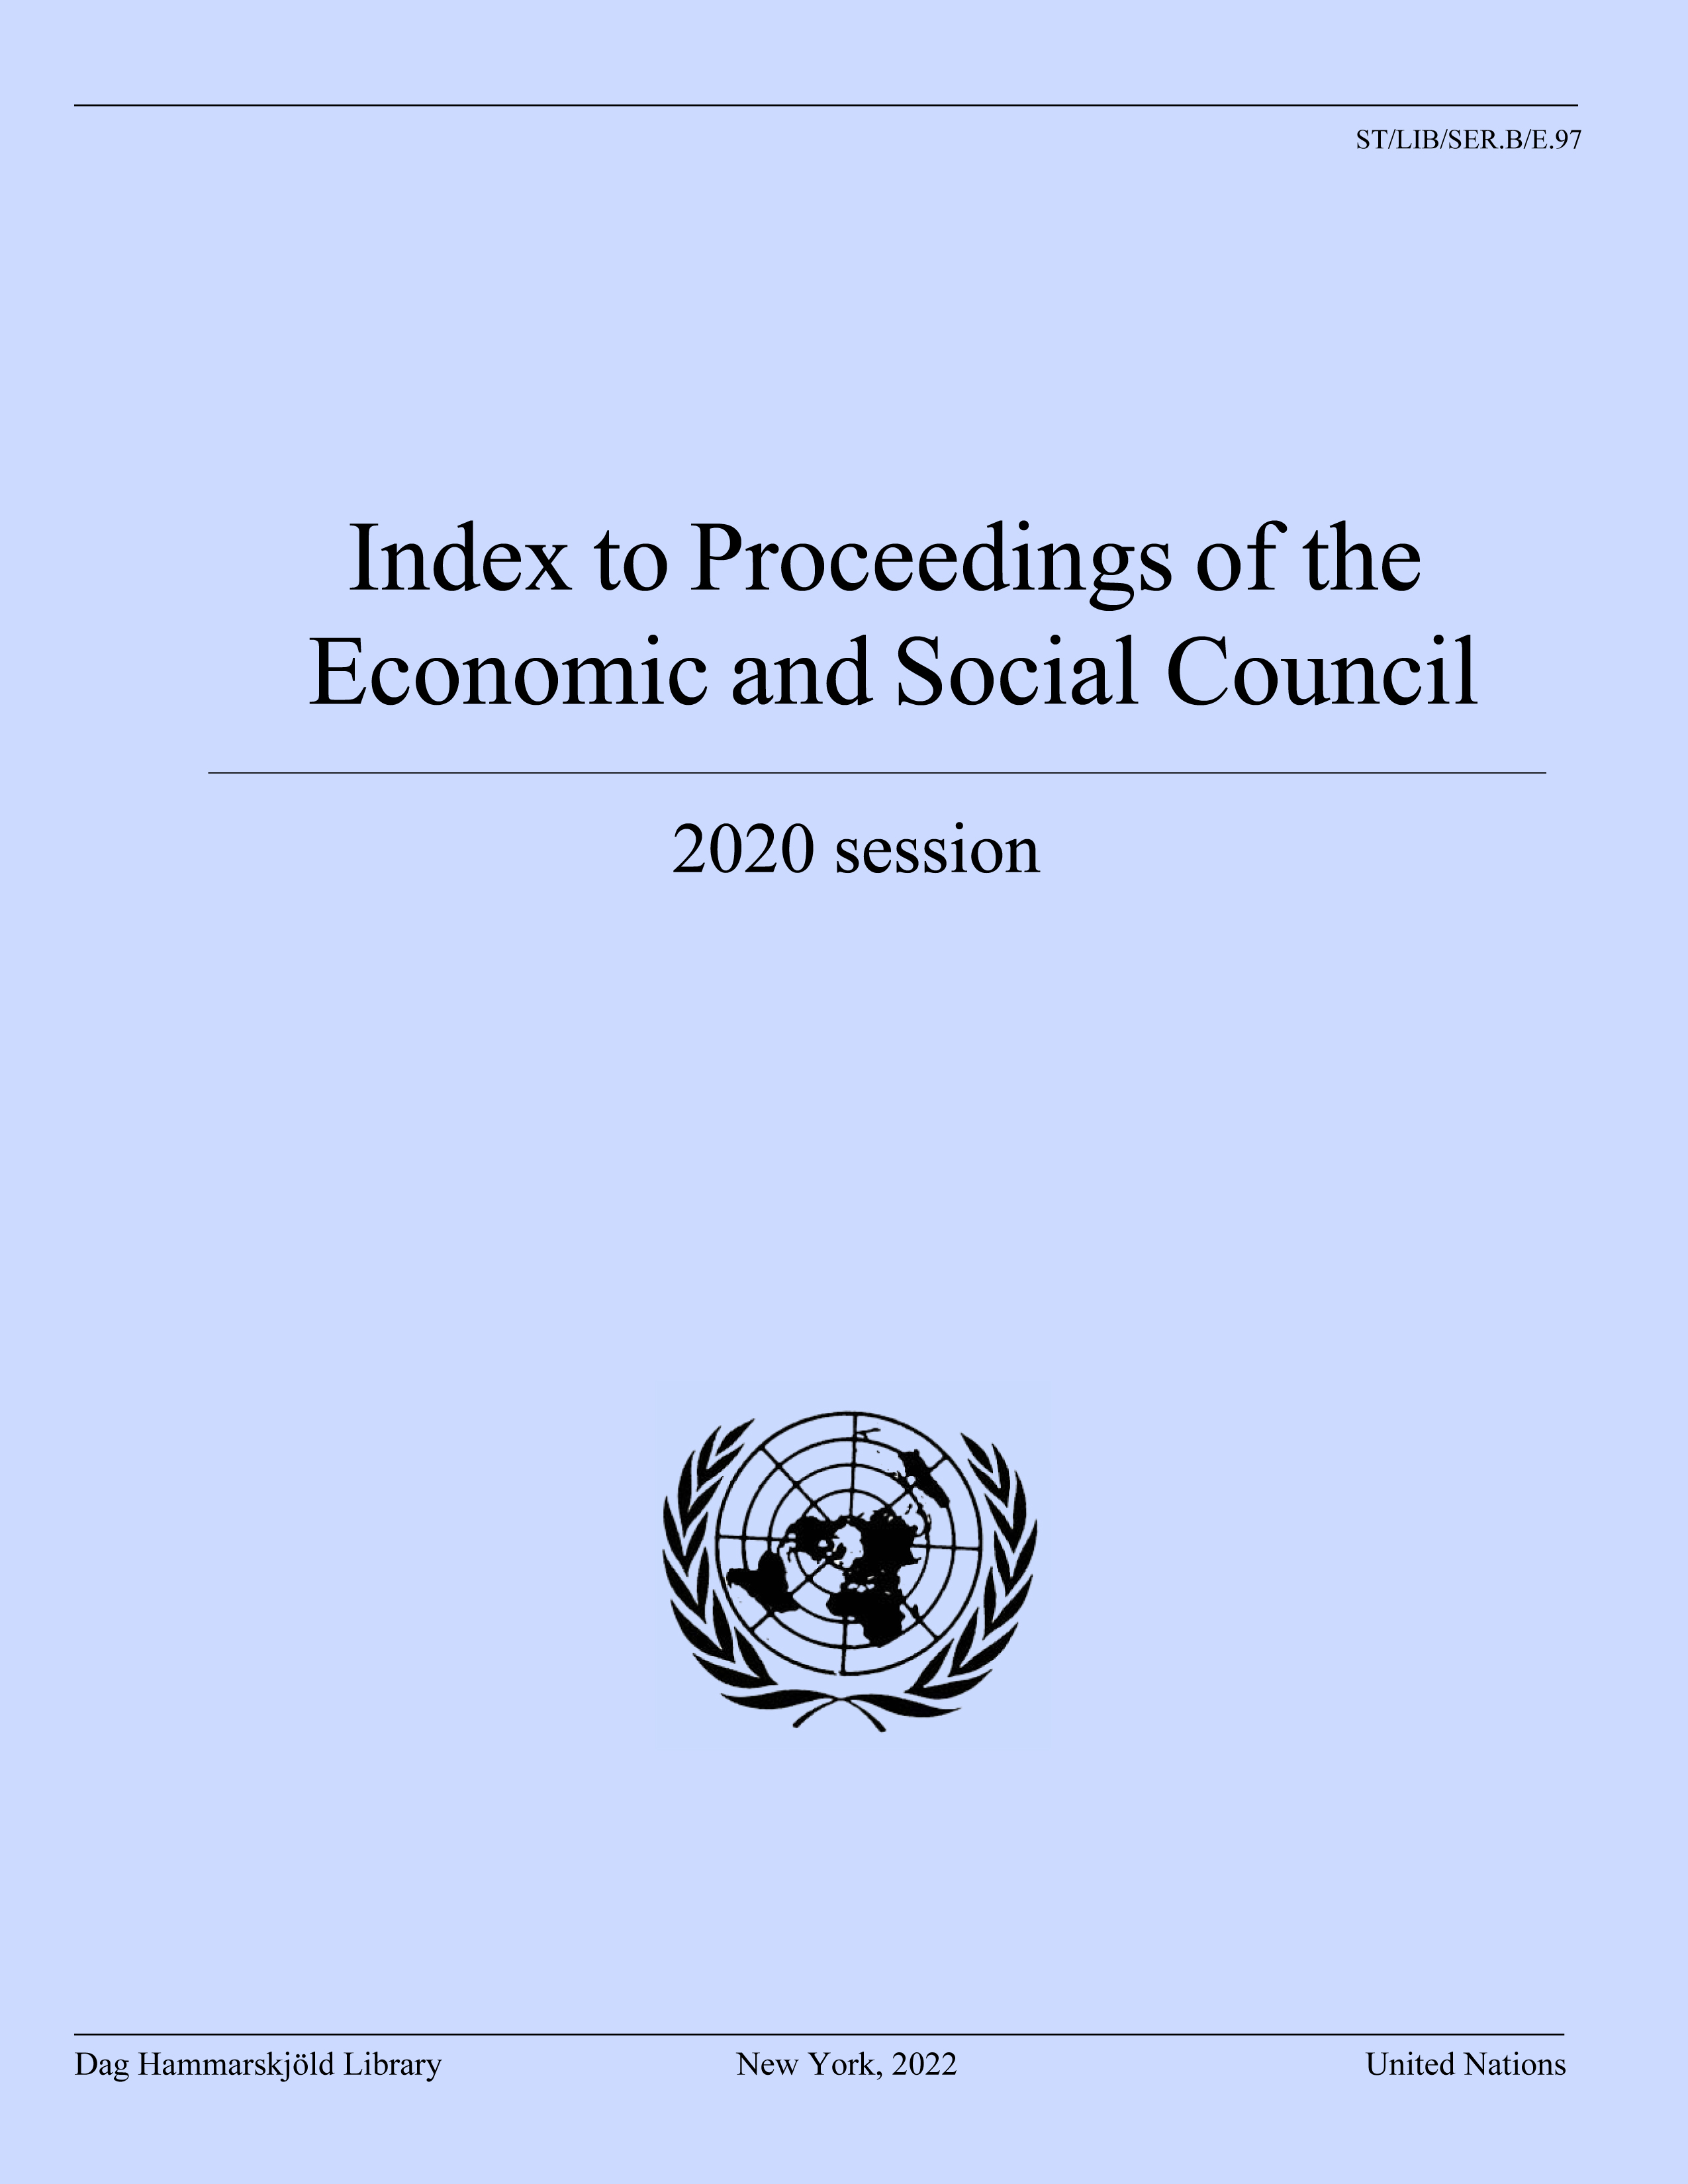 image of Index to Proceedings of the Economic and Social Council 2020